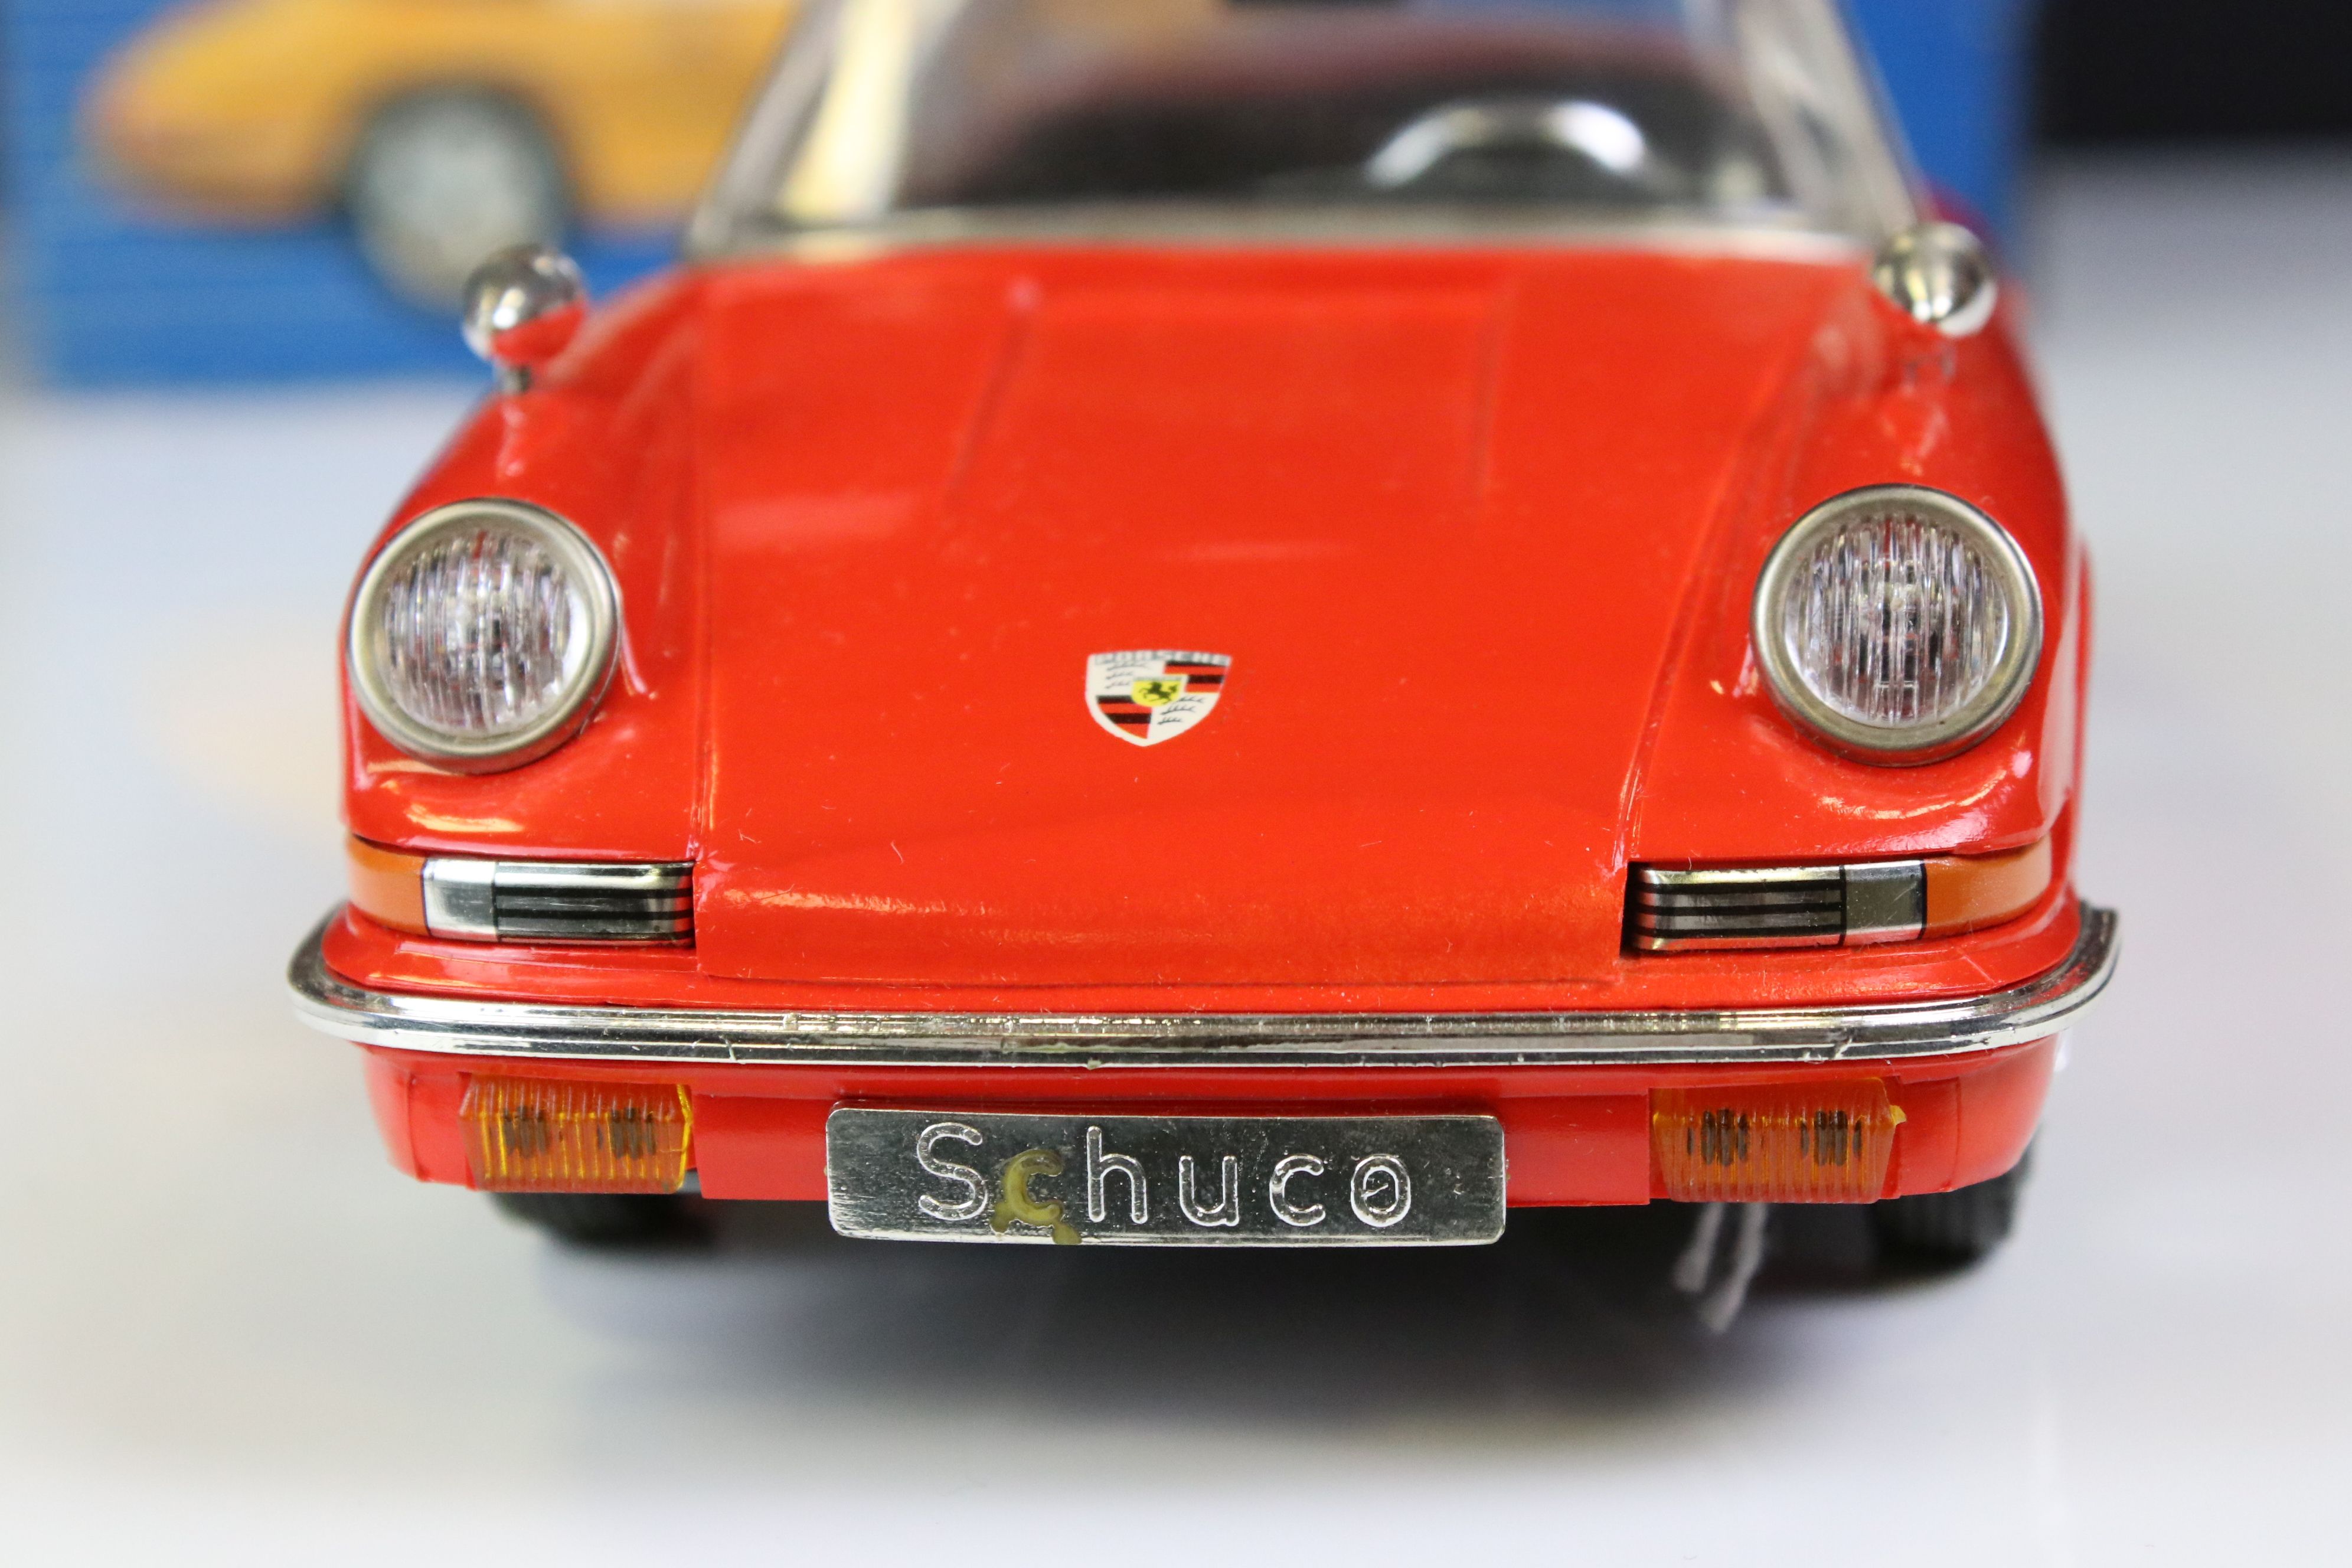 Boxed Schuco clockwork Porsche Targa 911S in red with black roof, vg condition with only minor paint - Bild 2 aus 8